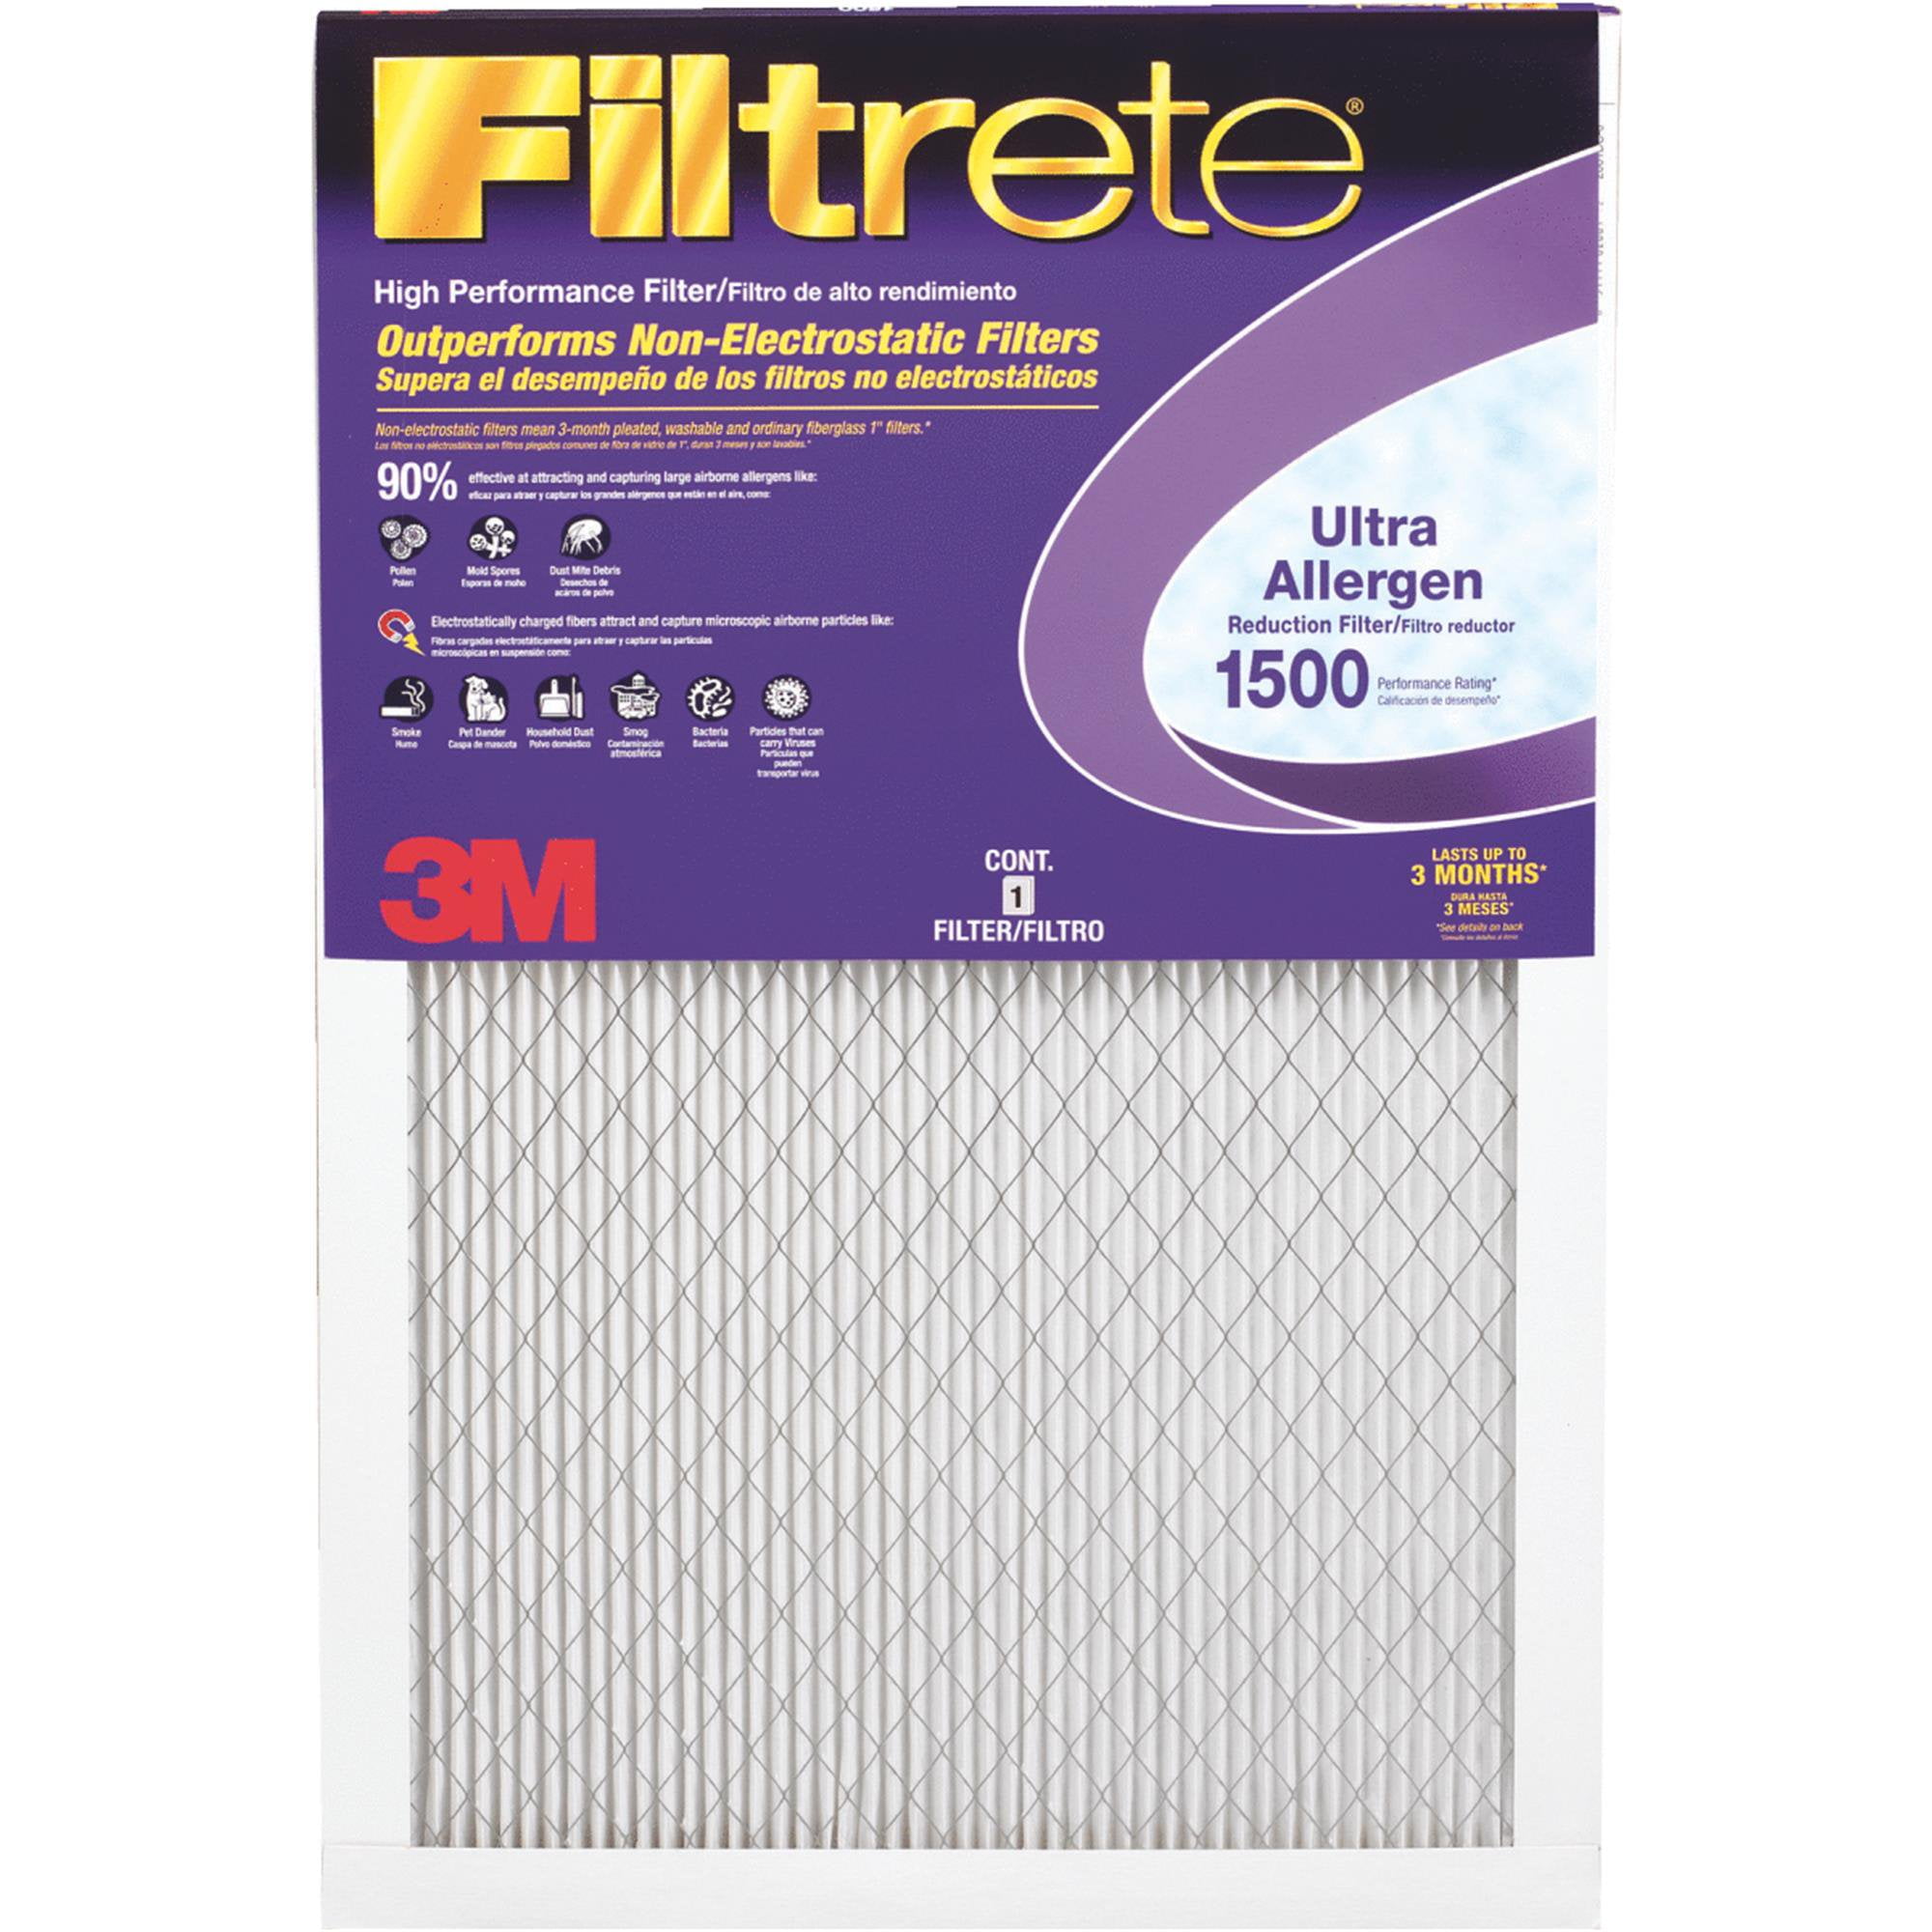 Are 3m Filters Bad For Furnace